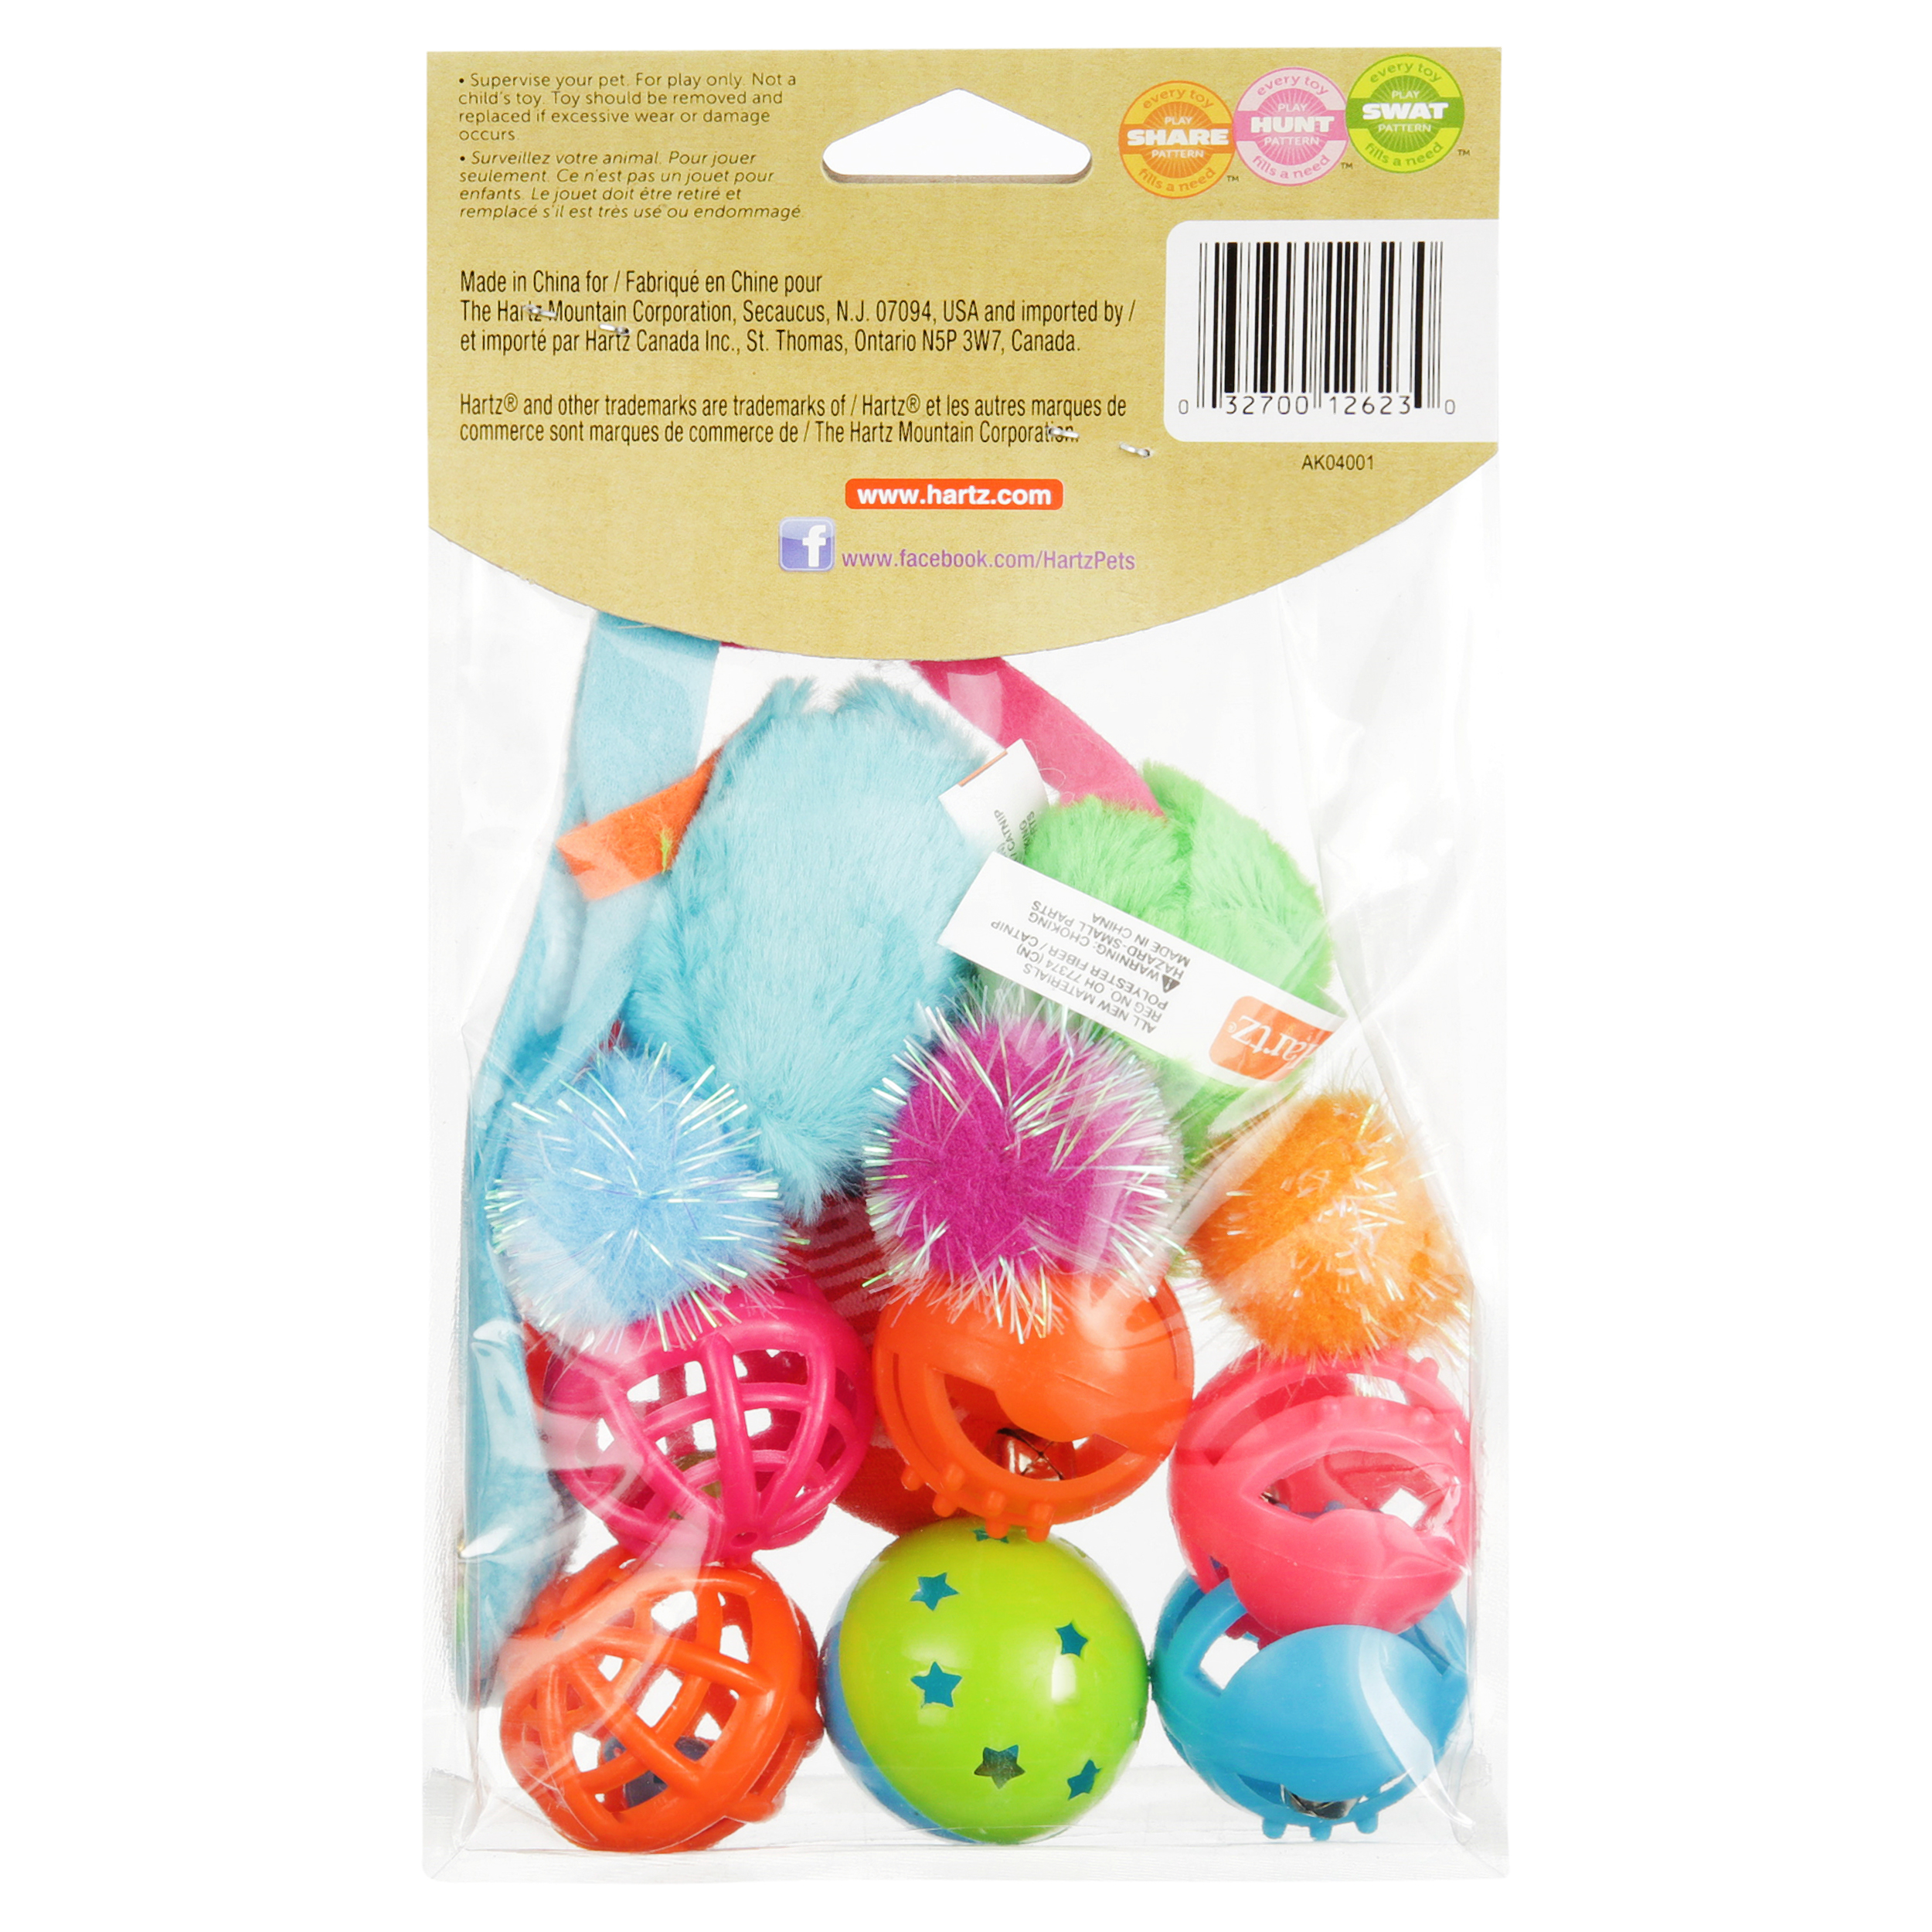 Hartz Just For Cats Cat Toy Variety Pack, 13 Count - image 3 of 5